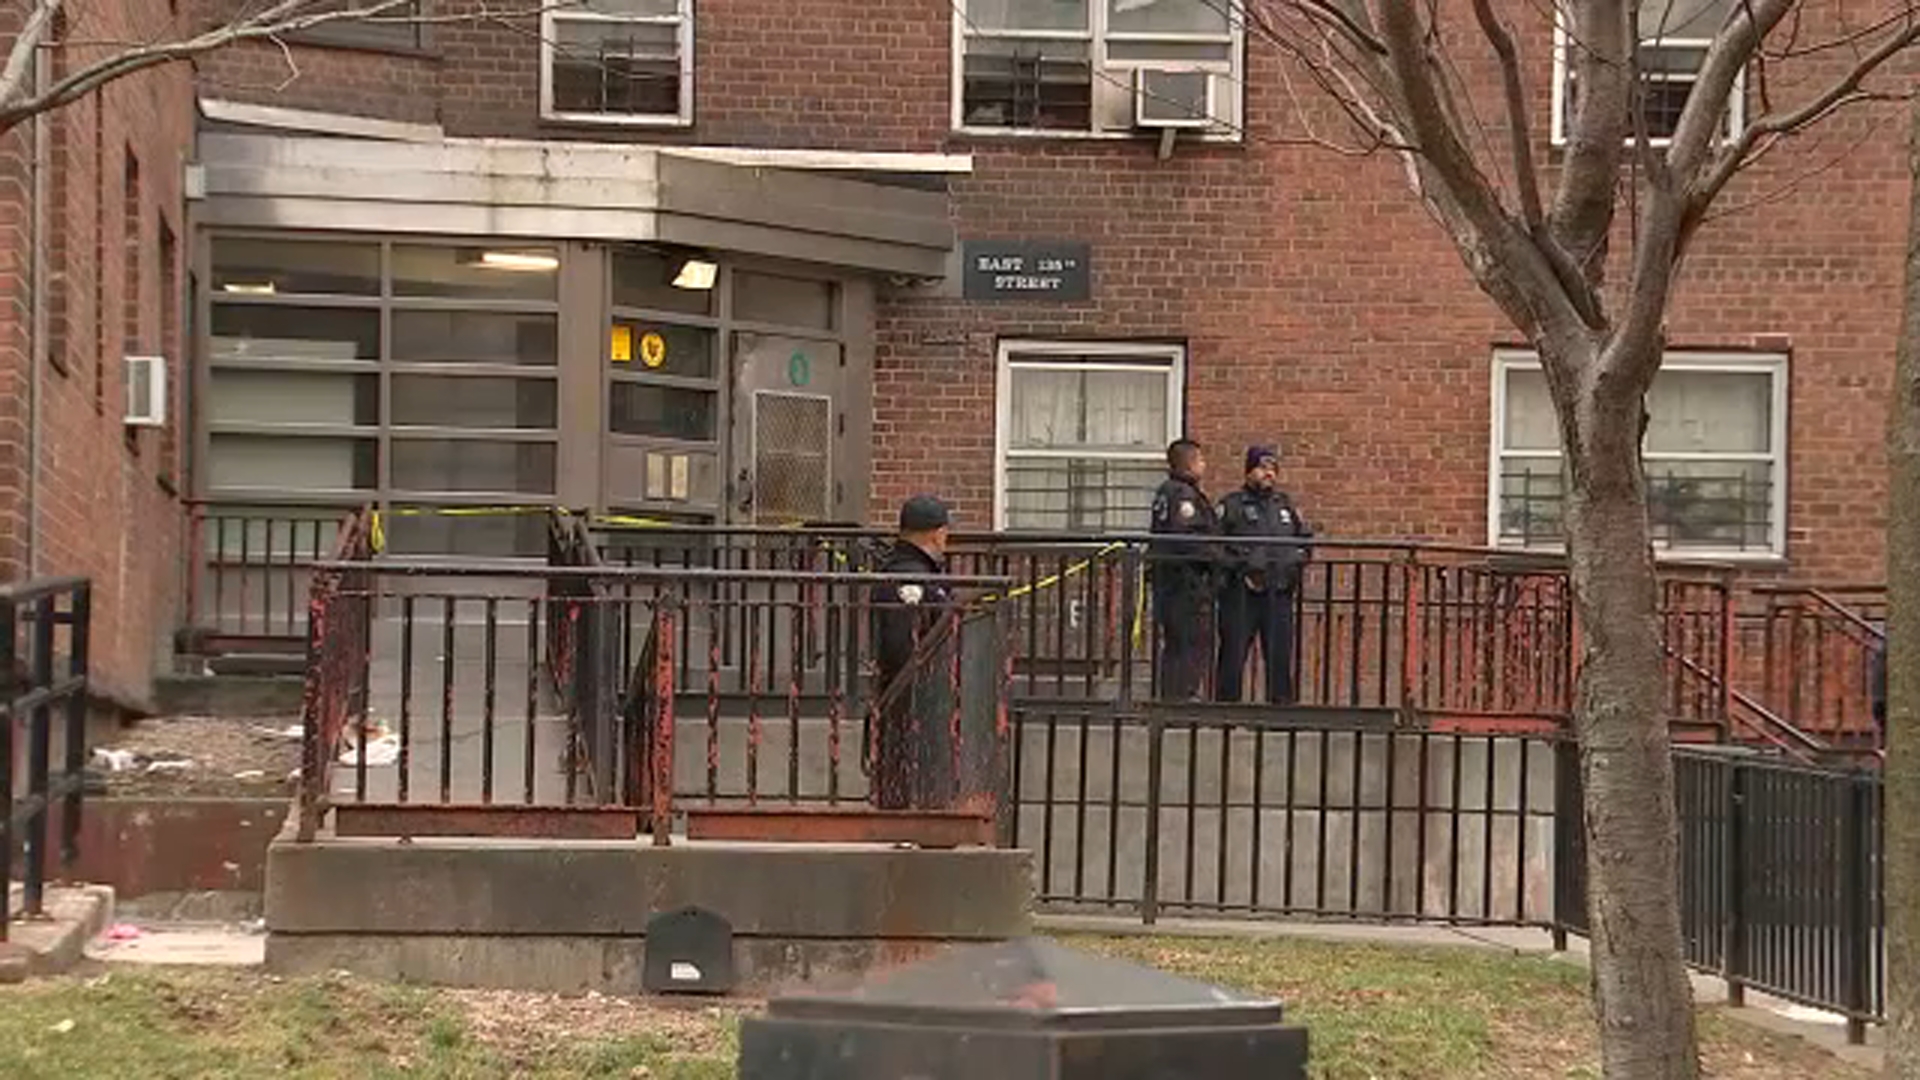 Woman shot, critically injured, after intervening in neighbor’s dispute in East Harlem